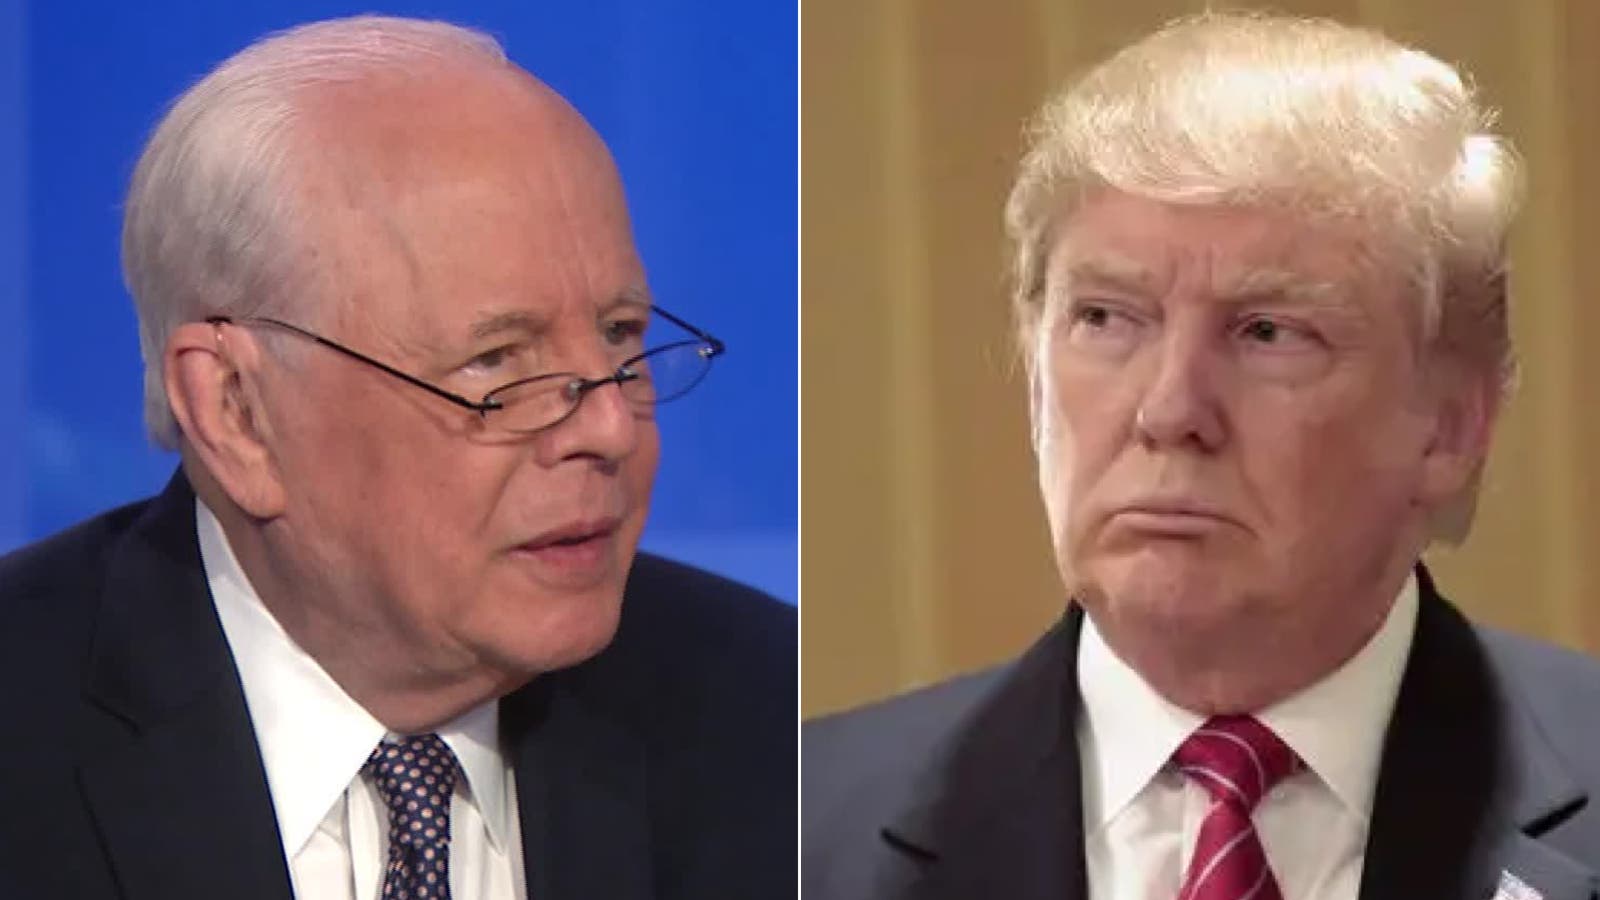 Trump indictment is "only a matter of how many days" according to John Dean